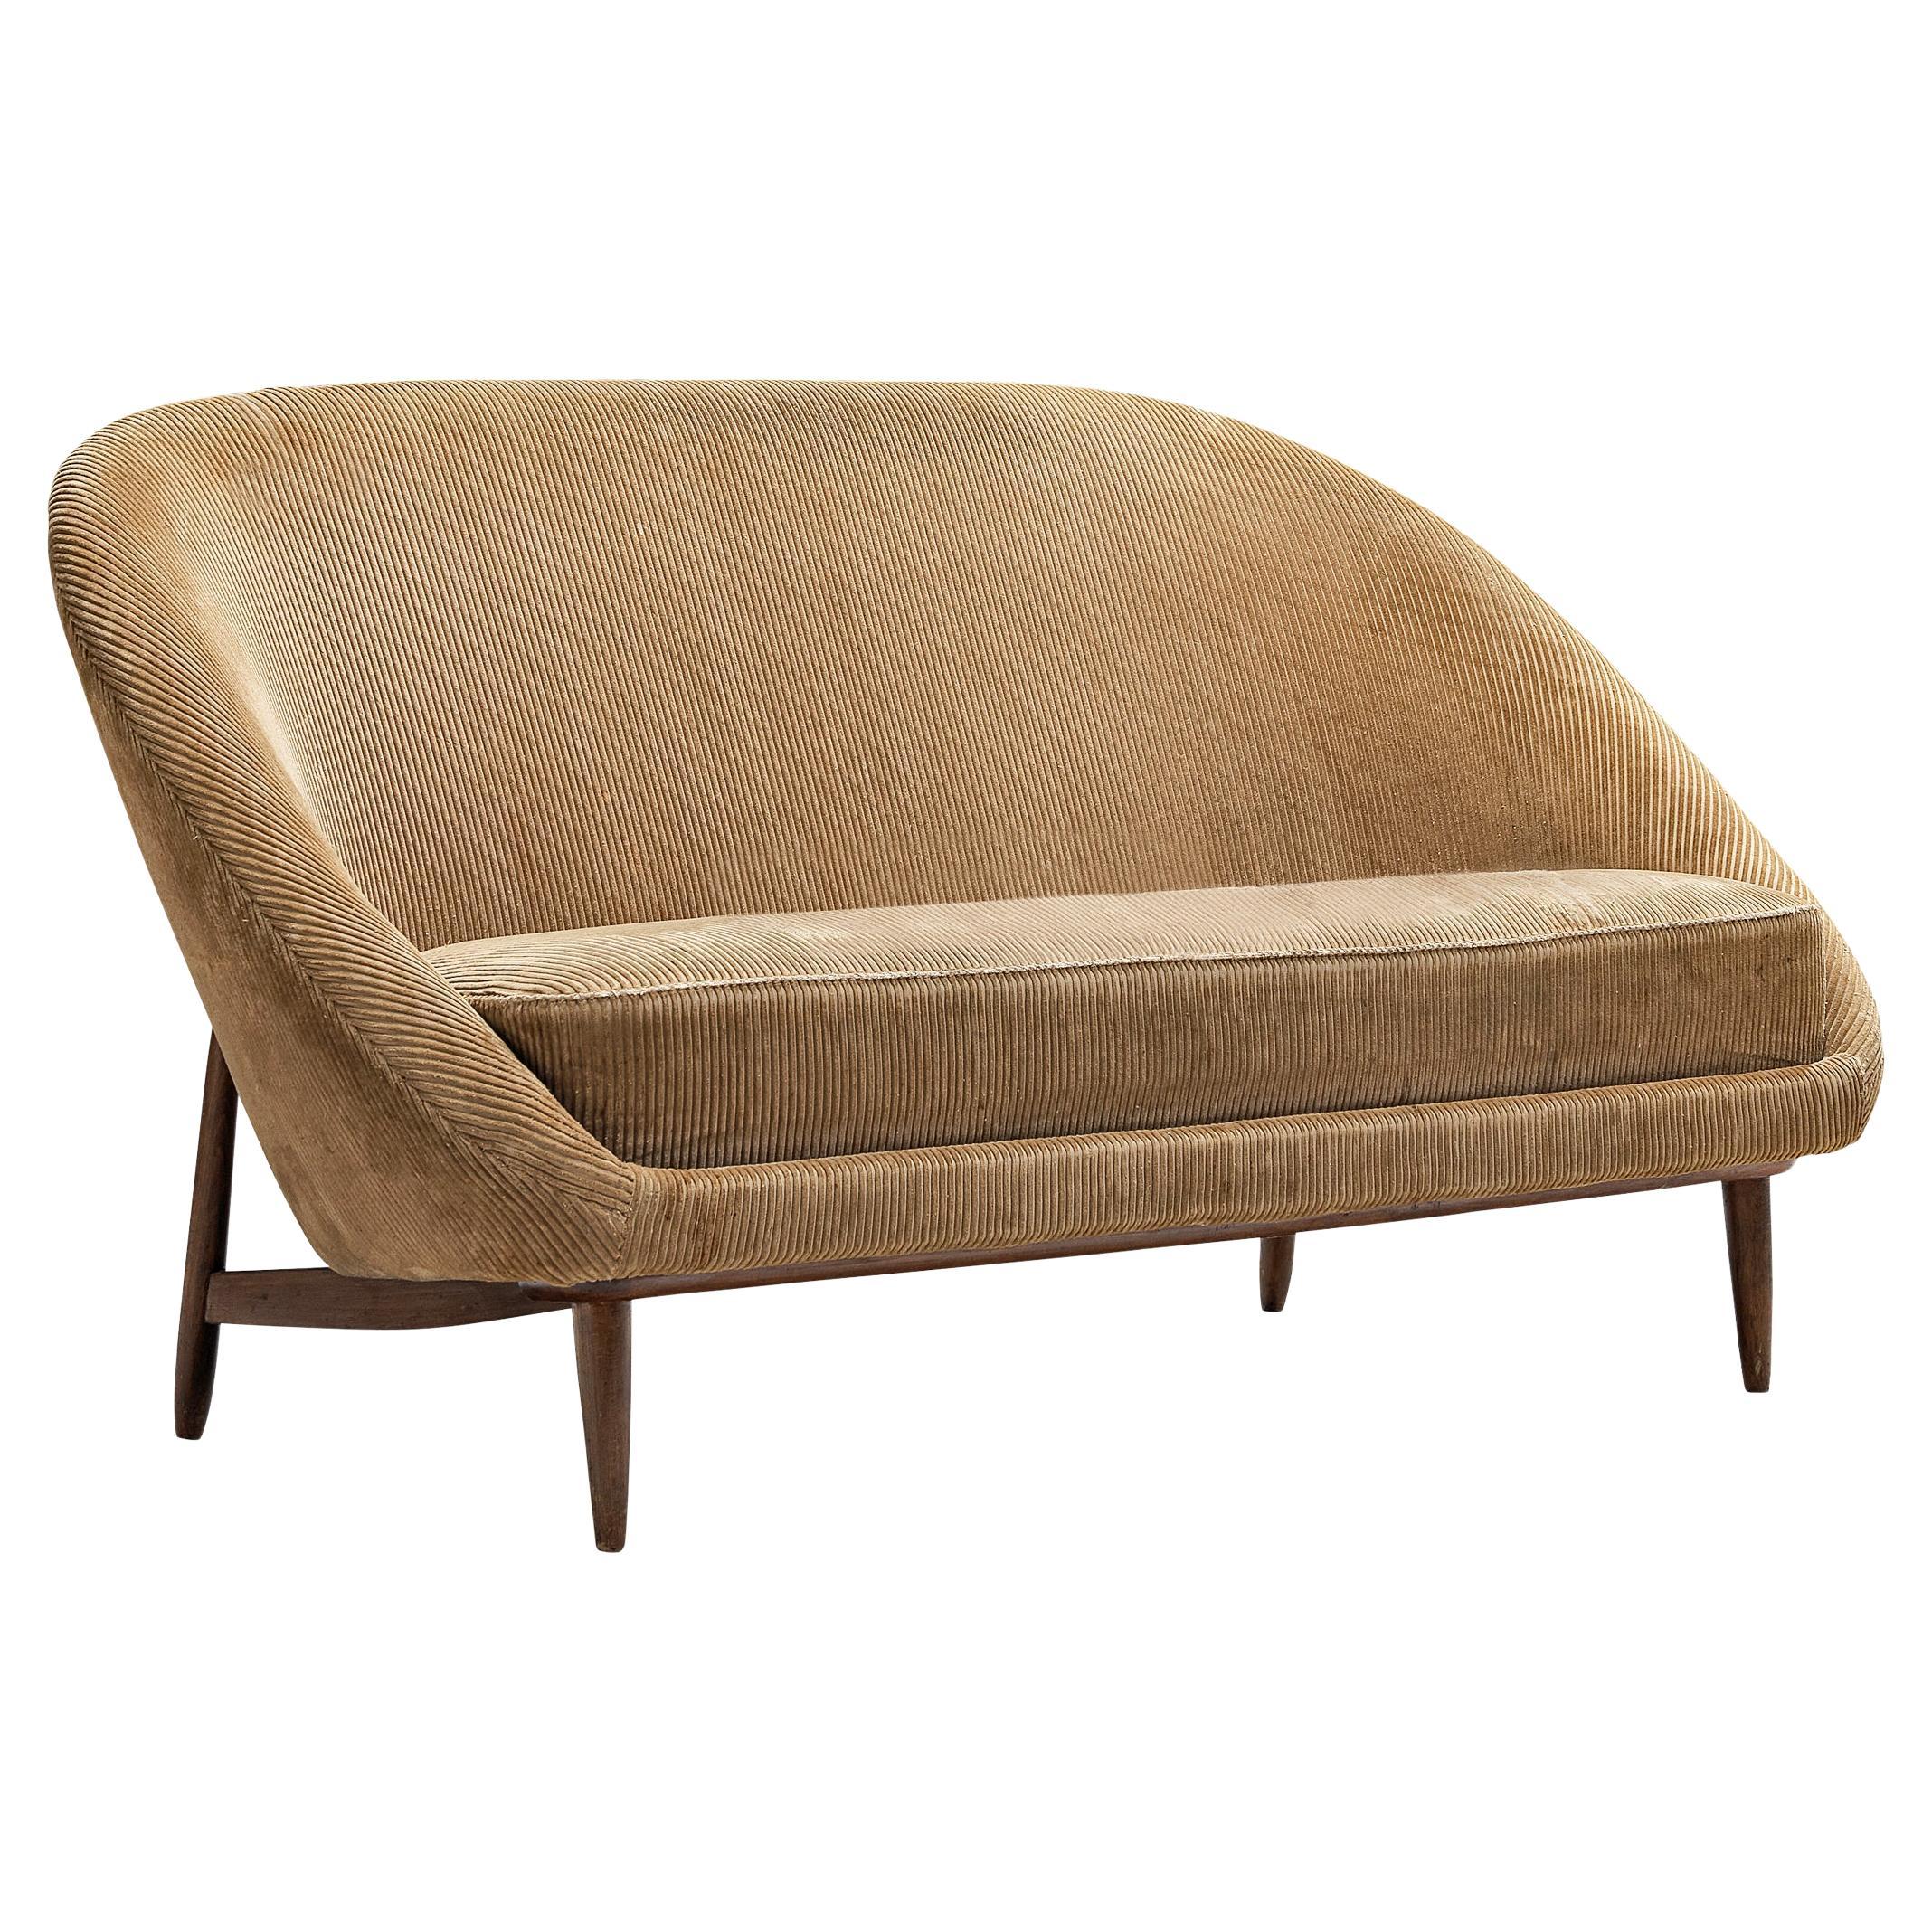 Theo Ruth for Artifort Sofa in Beige Corduroy Upholstery  For Sale